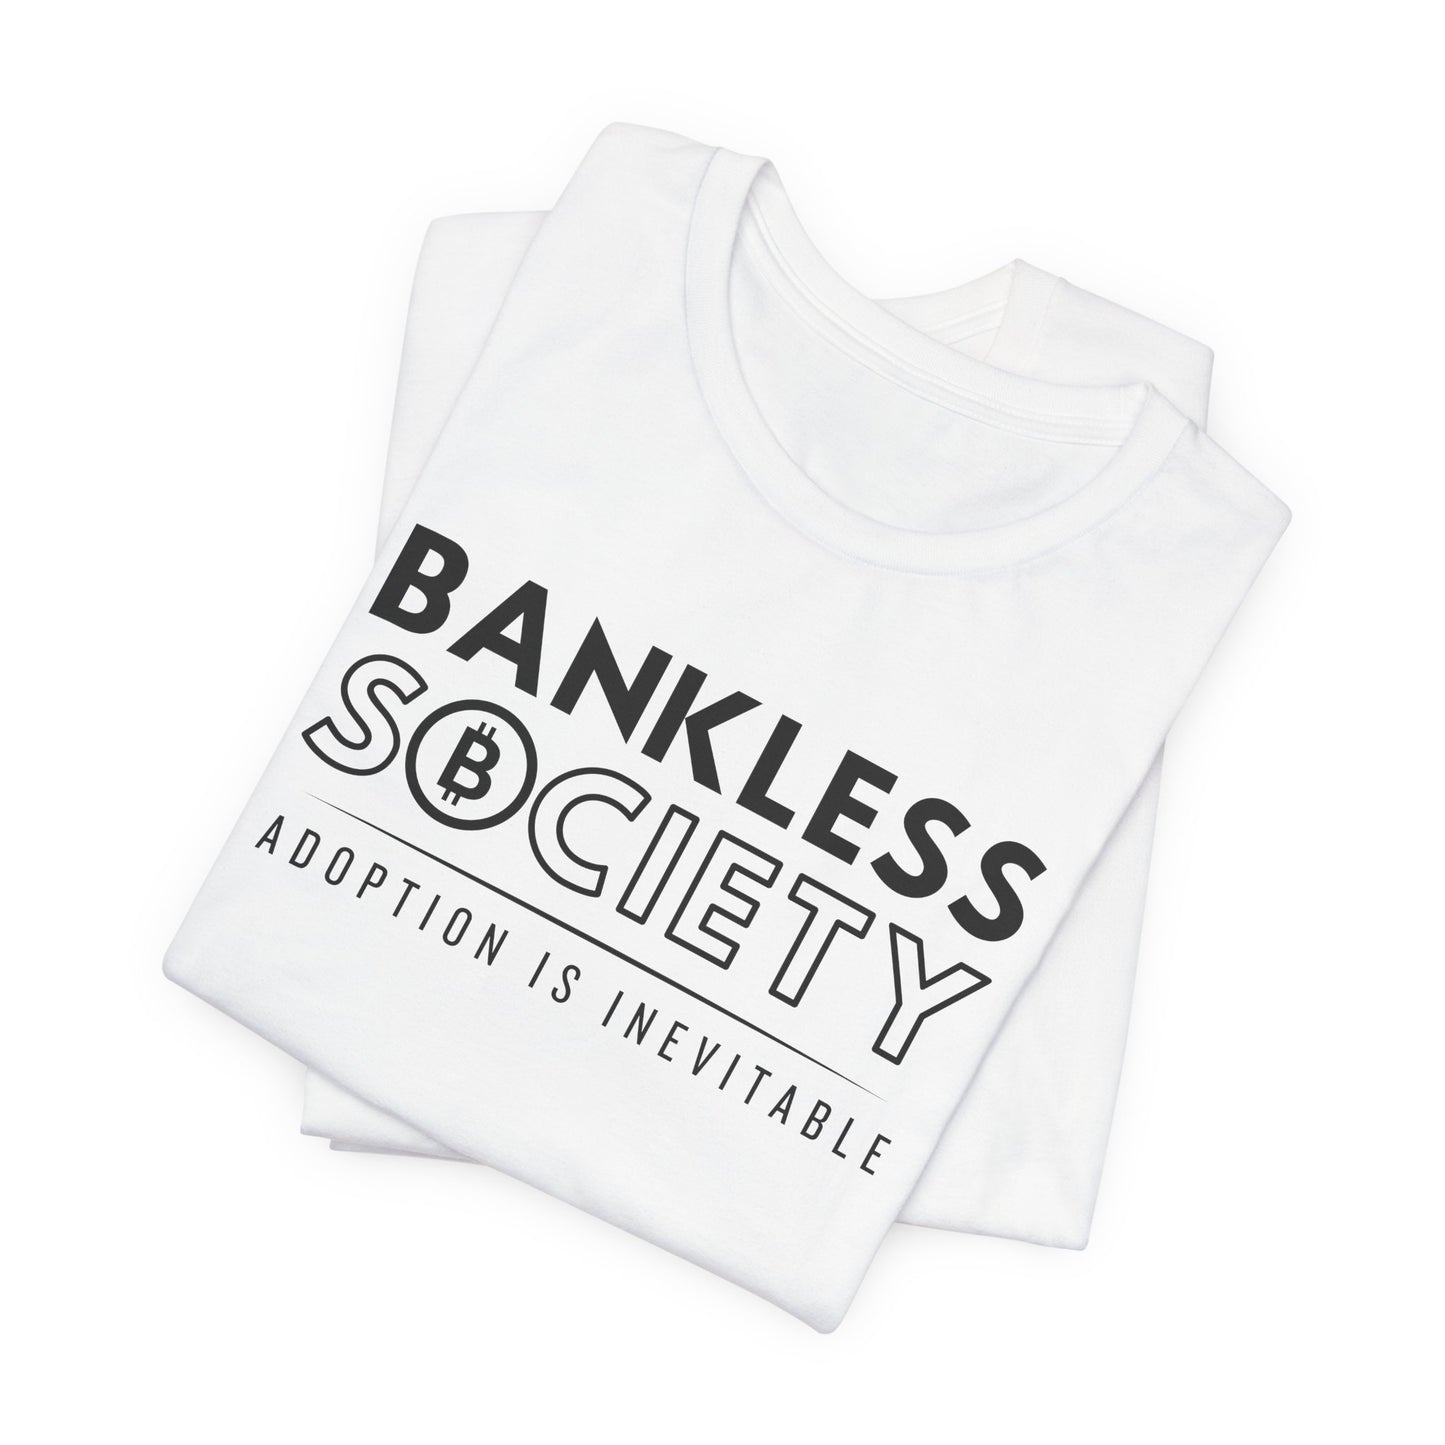 White Bella Canvas 3001 unisex t-shirt. Bankless Society, Adoption is Inevitable